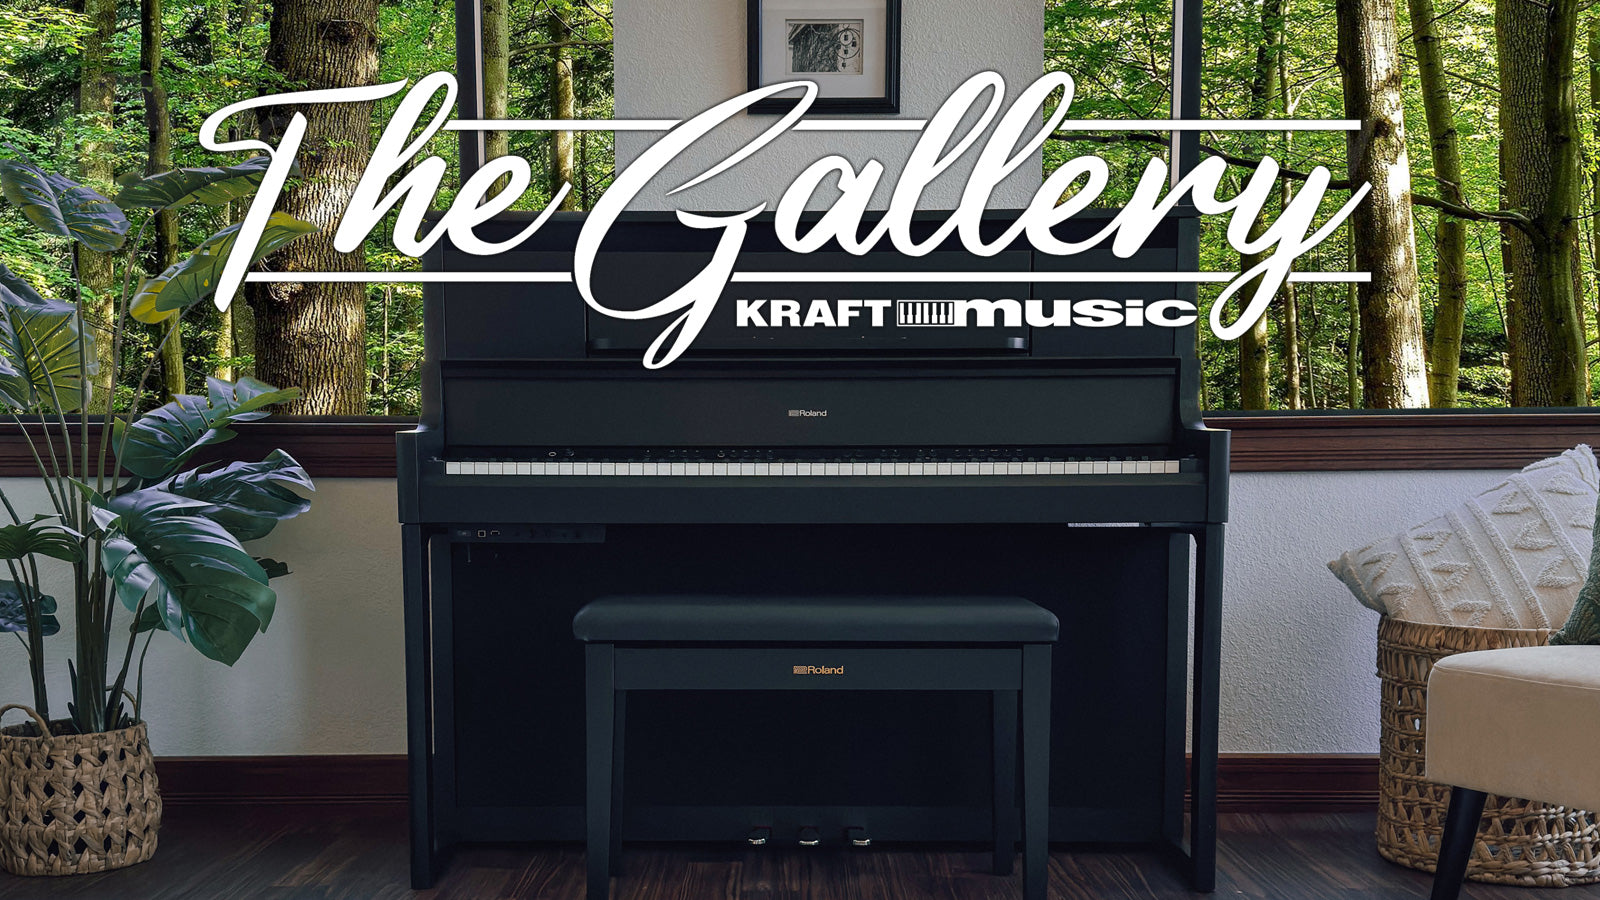 Image of Roland LX-9 with logo text, "The Gallery at Kraft Music"